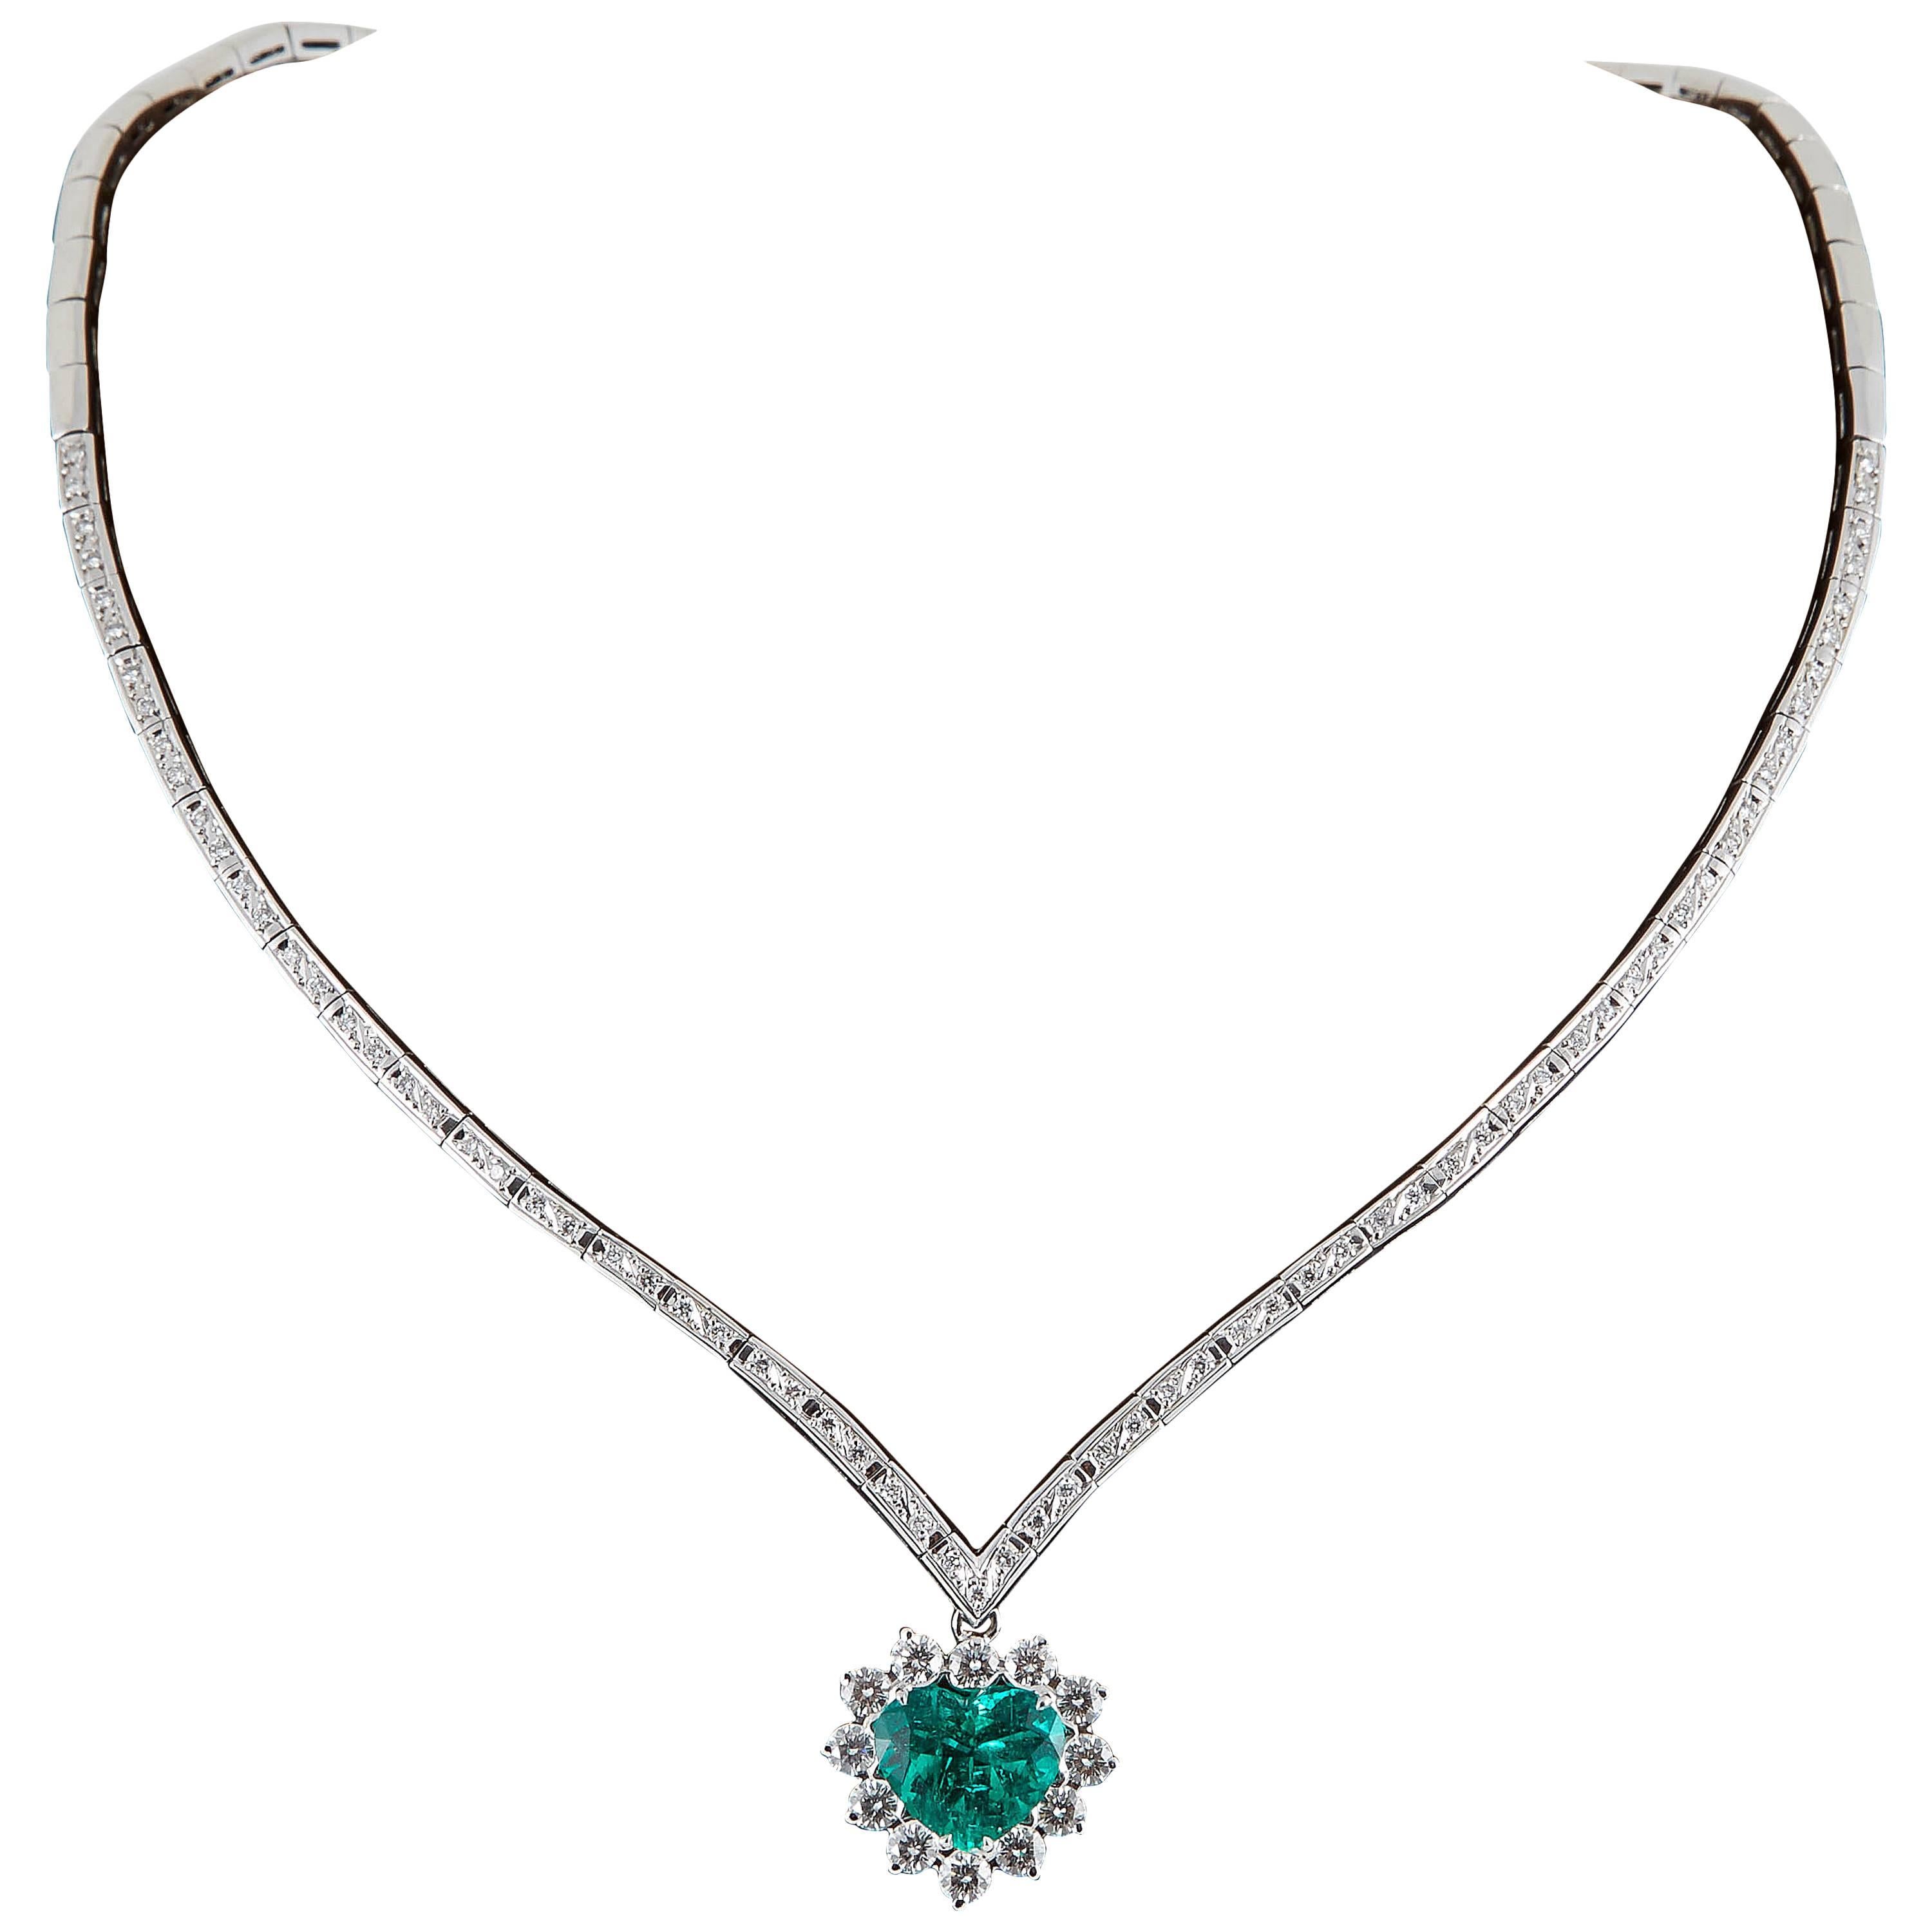 Rare AGL Certified Fine Colombian Heart Shaped Emerald Diamond Gold Necklace